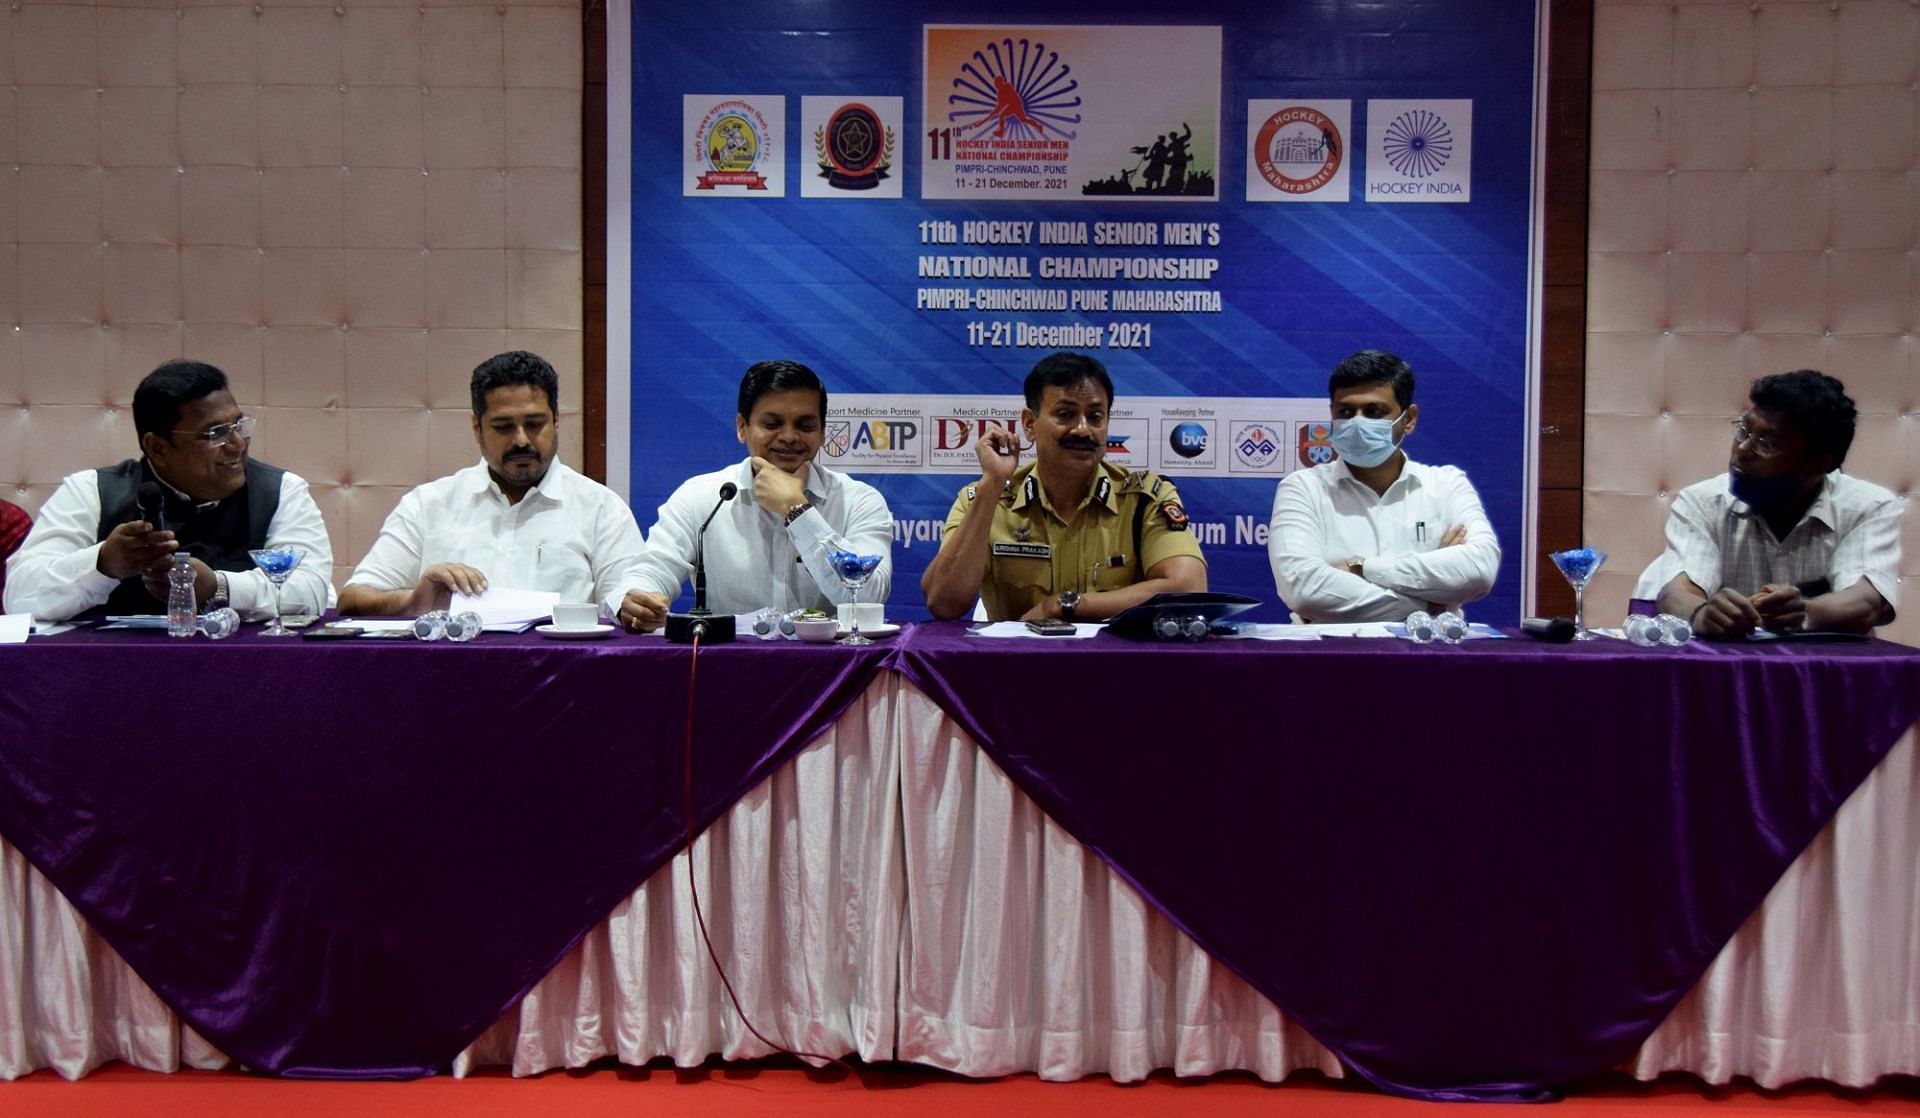 Hockey Maharashtra officials (from L) Manish Anand, Rajesh Patil, Krishna Prakash and Ajit Lakra during a press conference in Pune on Wednesday